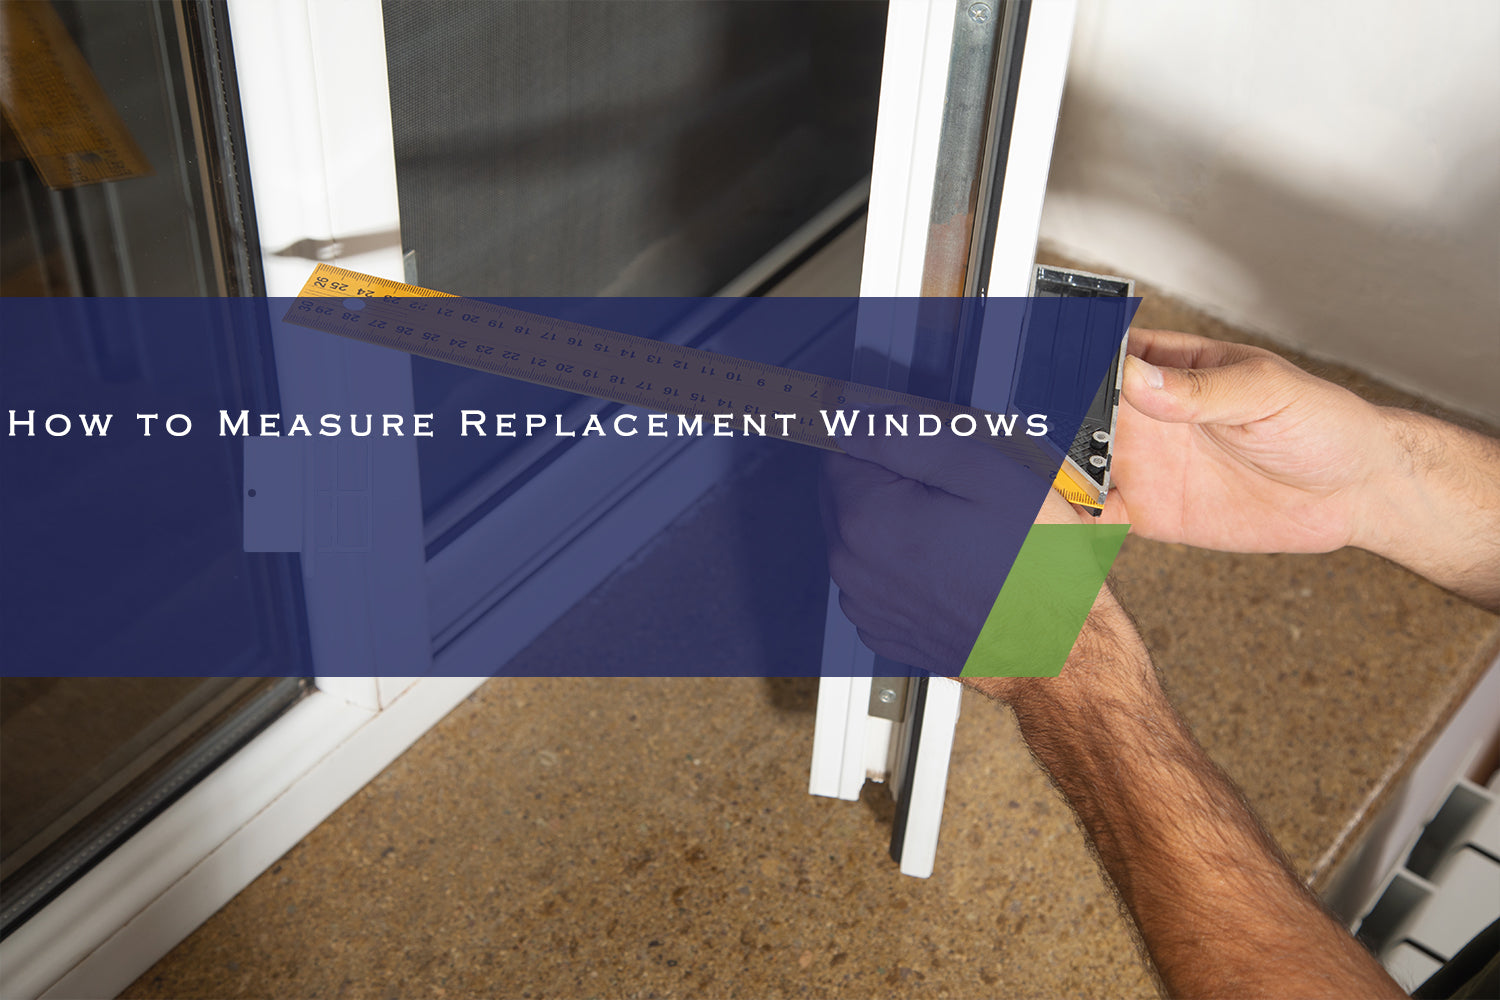 How to Measure Replacement Windows